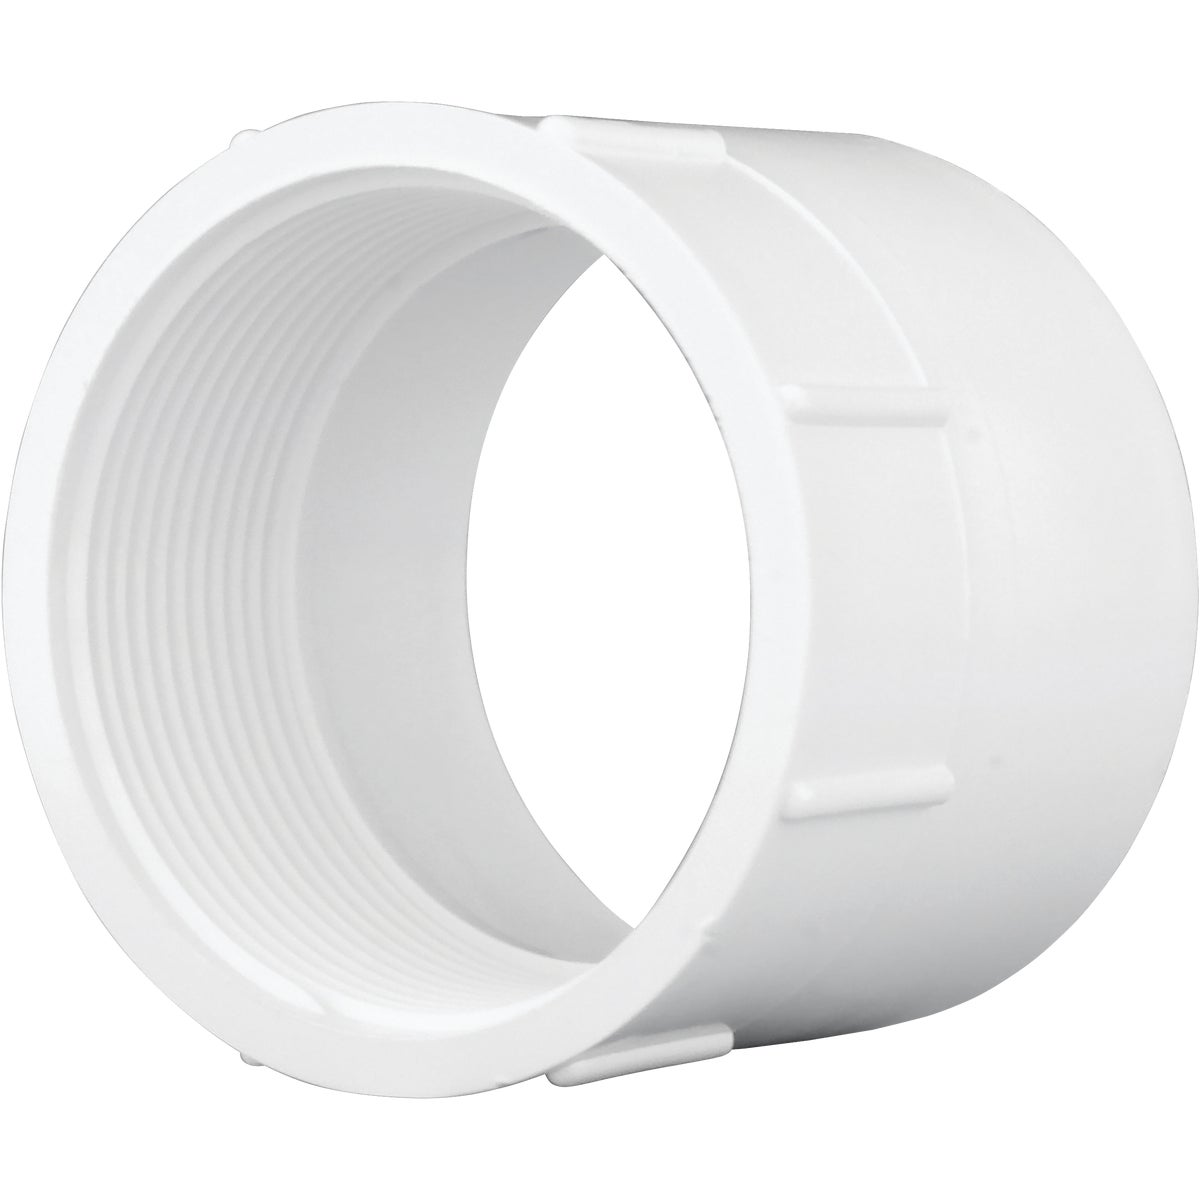 Charlotte Pipe 3 In. Hub x 3 In. FPT Schedule 40 DWV PVC Adapter